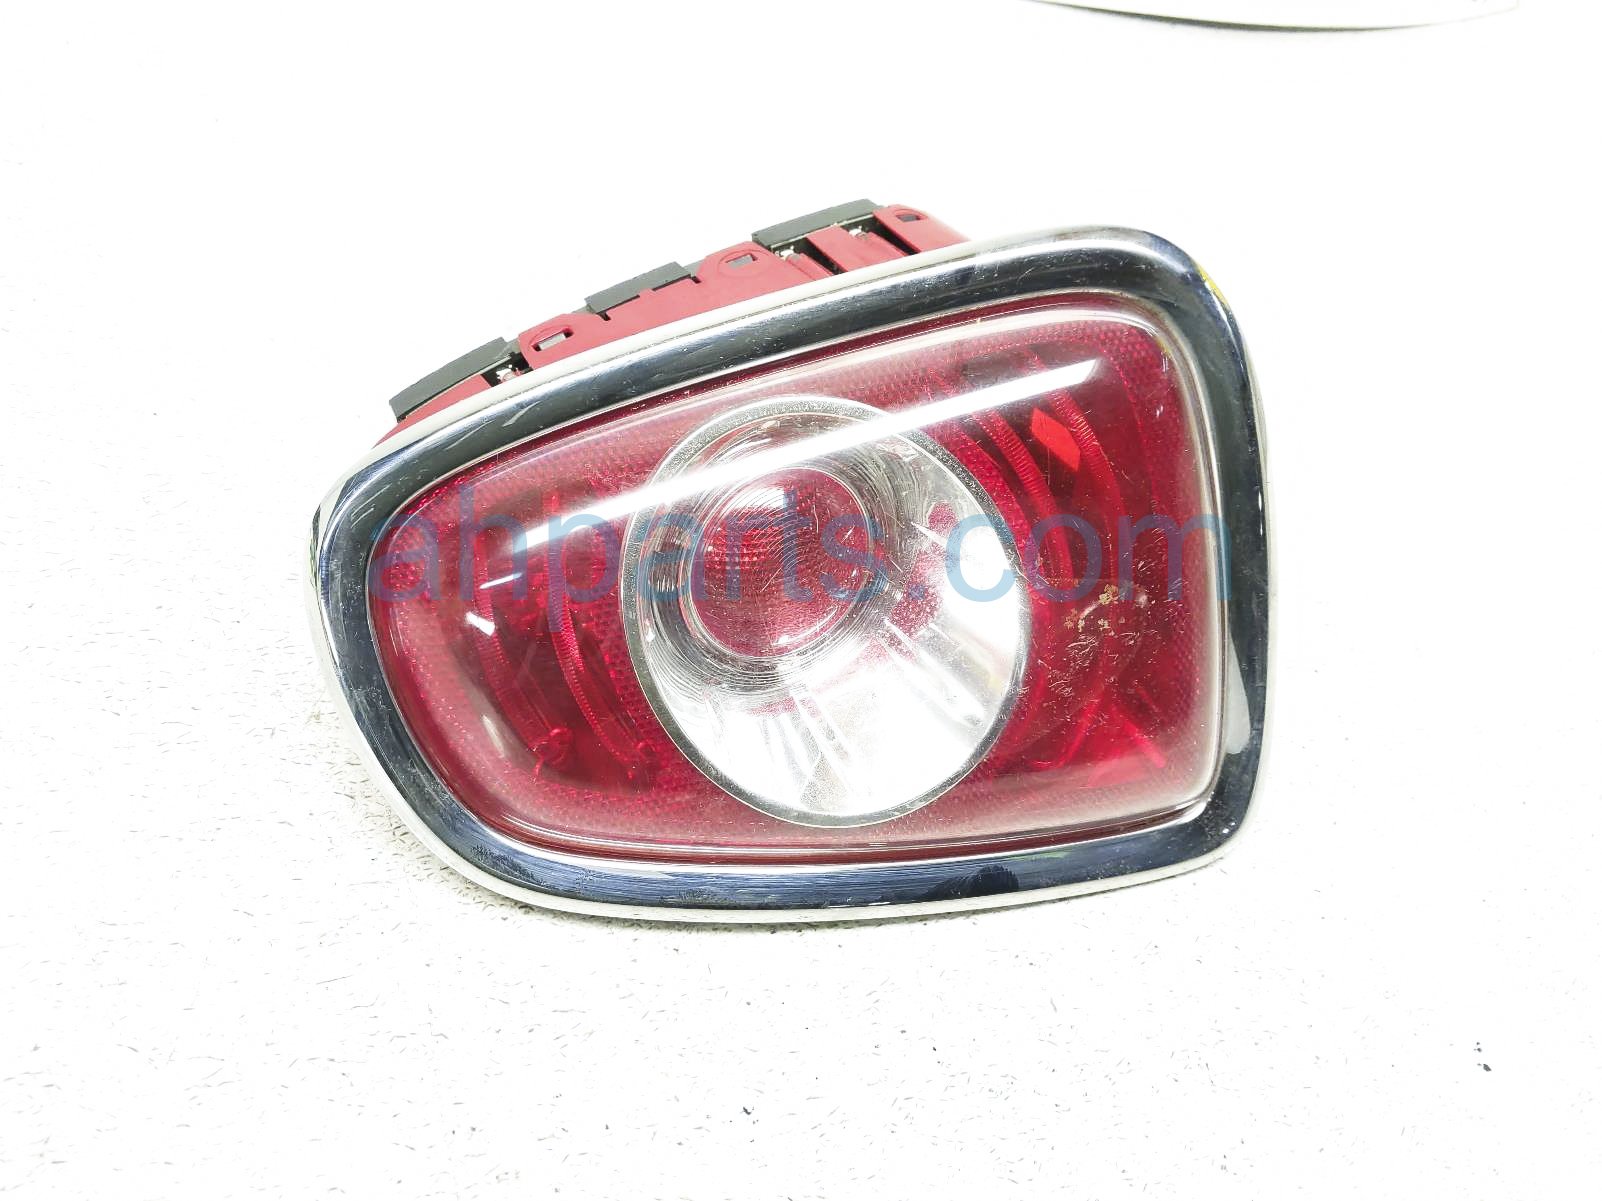 $80 BMW RH TAIL LAMP (ON BODY) - NOTES